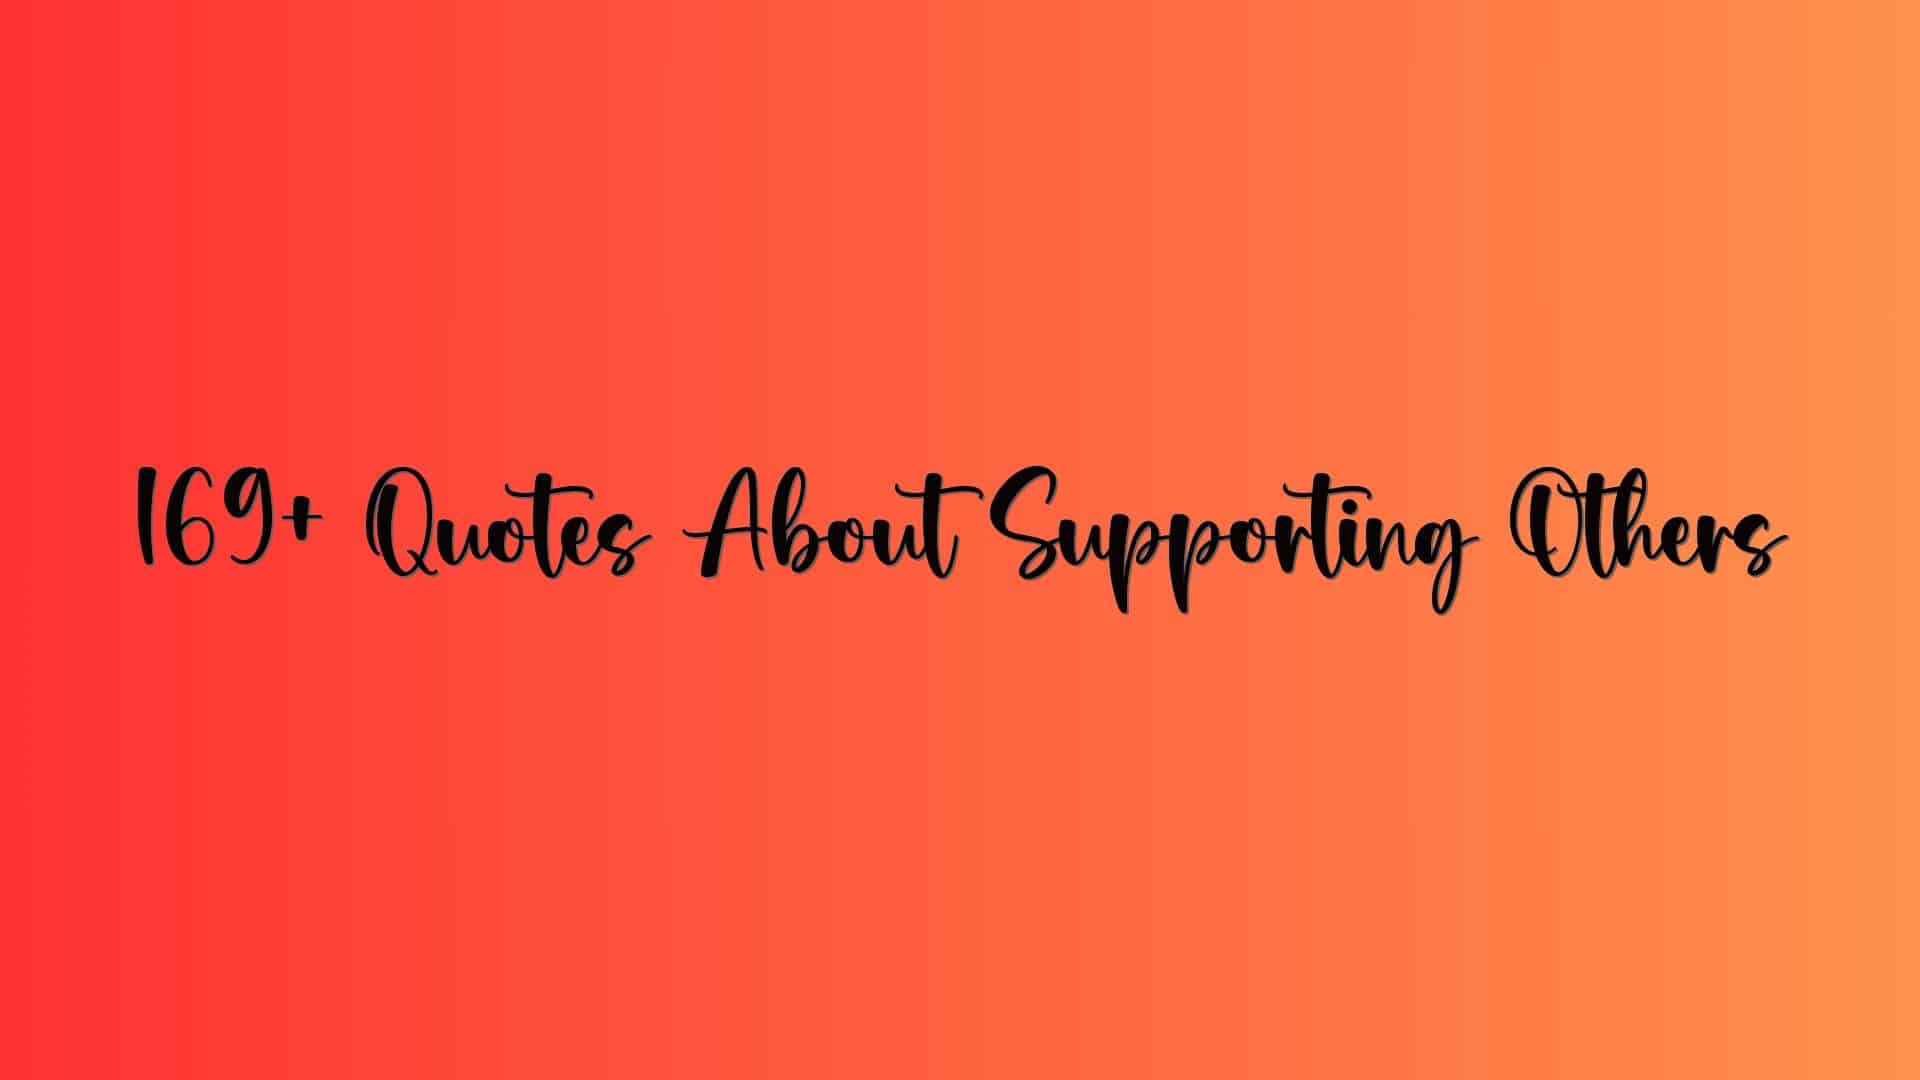 169+ Quotes About Supporting Others